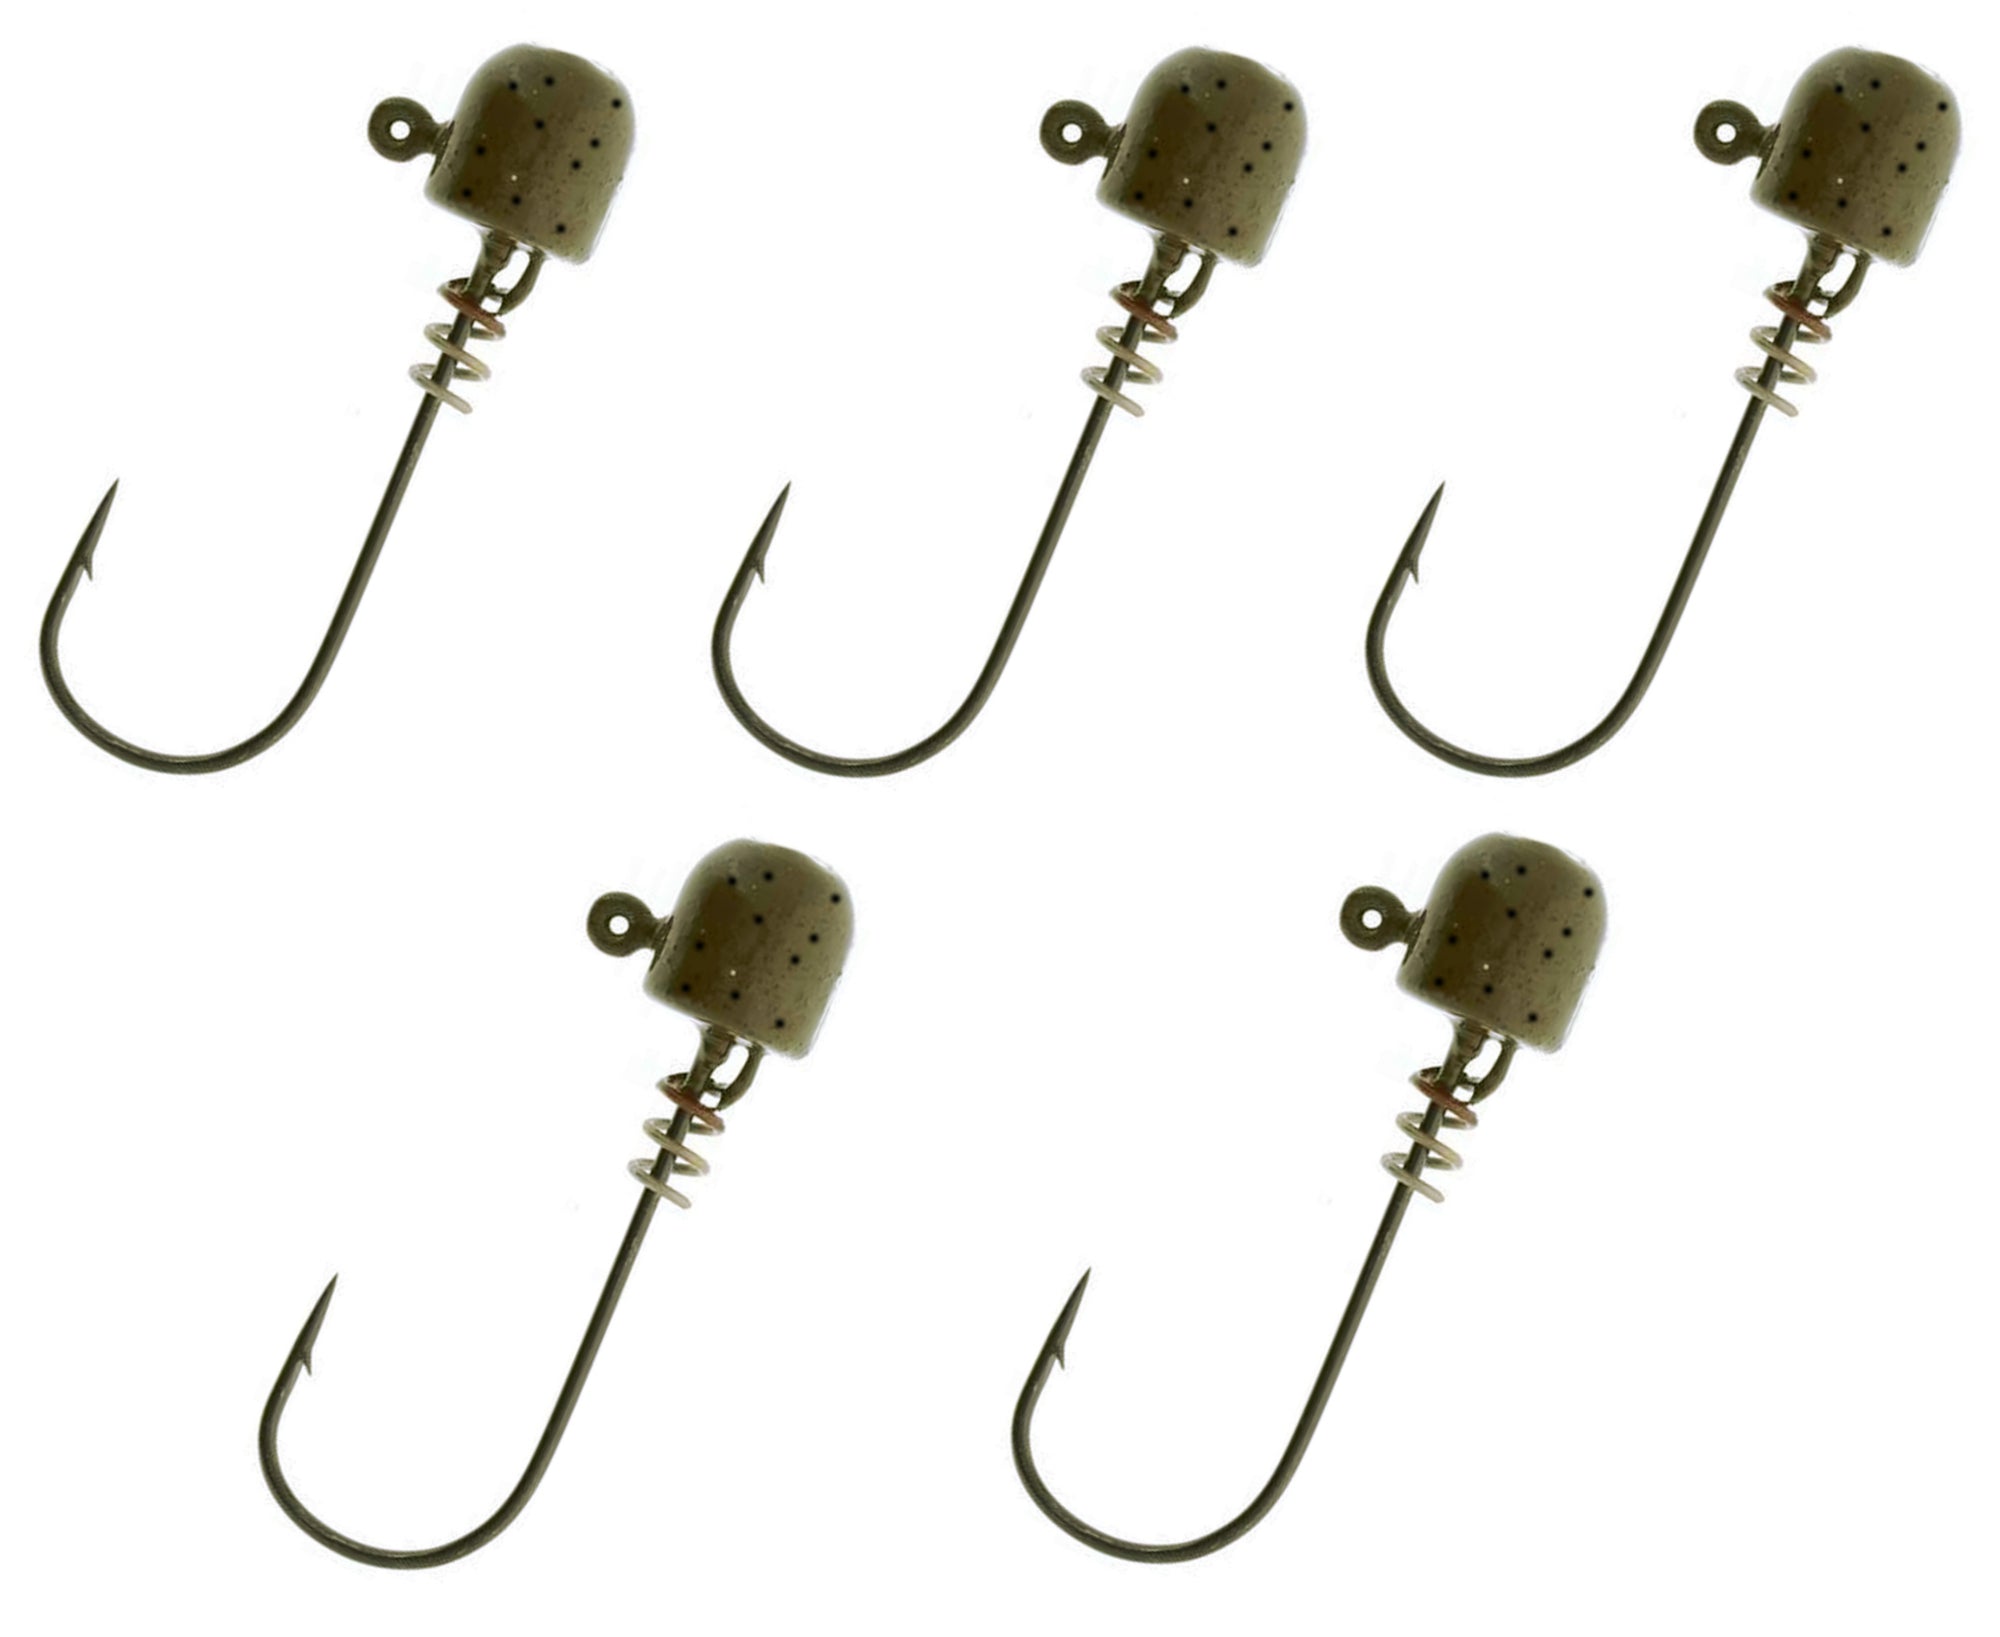 Reaction Tackle Tungsten Screw Lock Jig Heads (5-Pack) - image 4 of 5